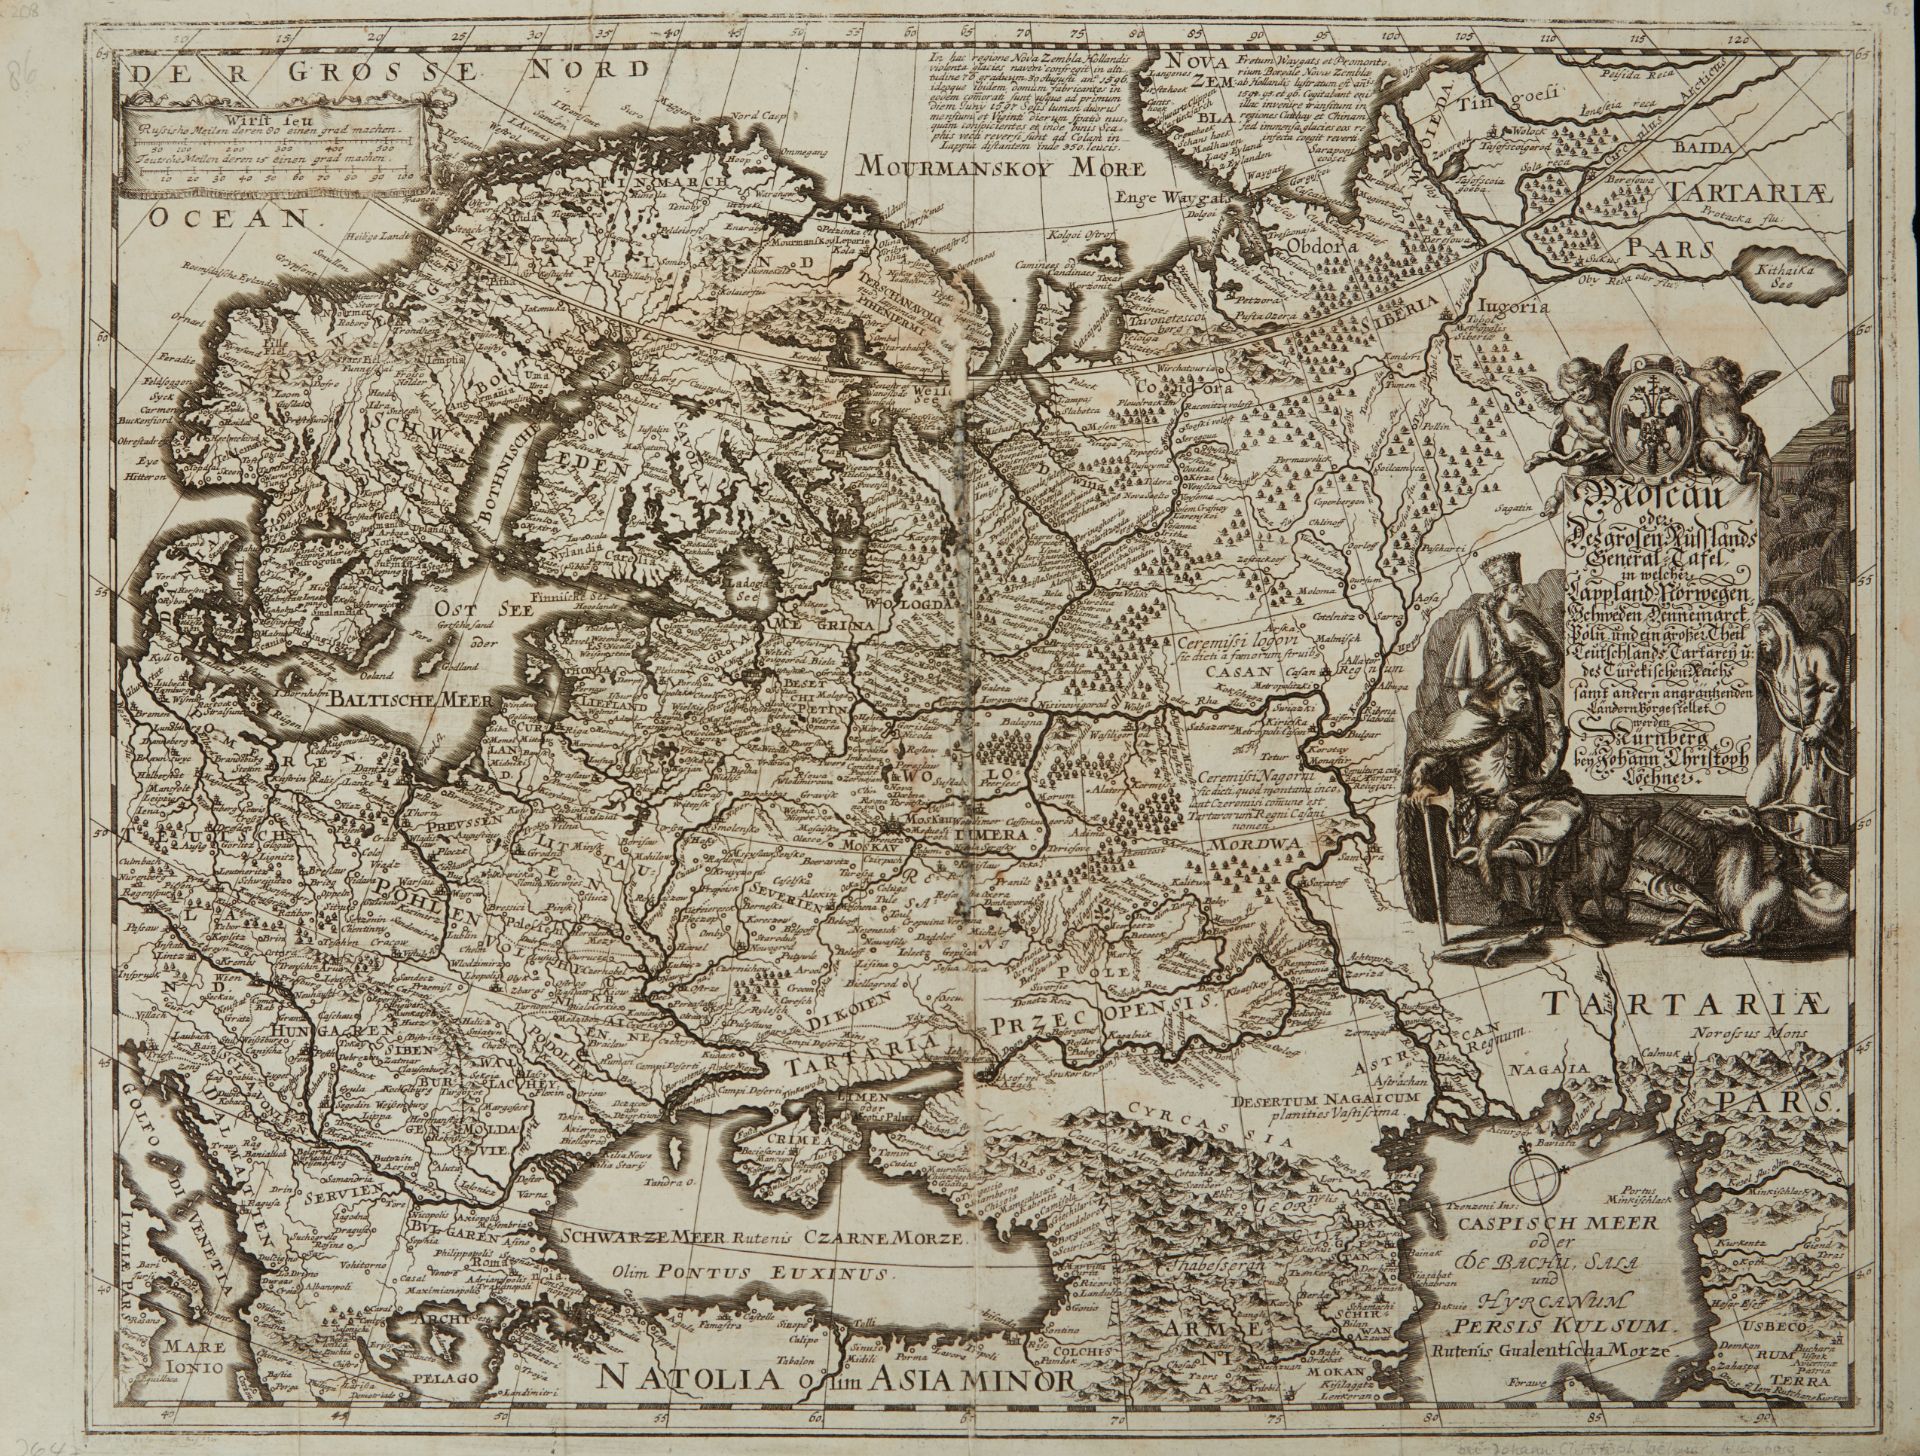 Map of Russia and frontier territories. The engraving was published in Nuremberg by [...]